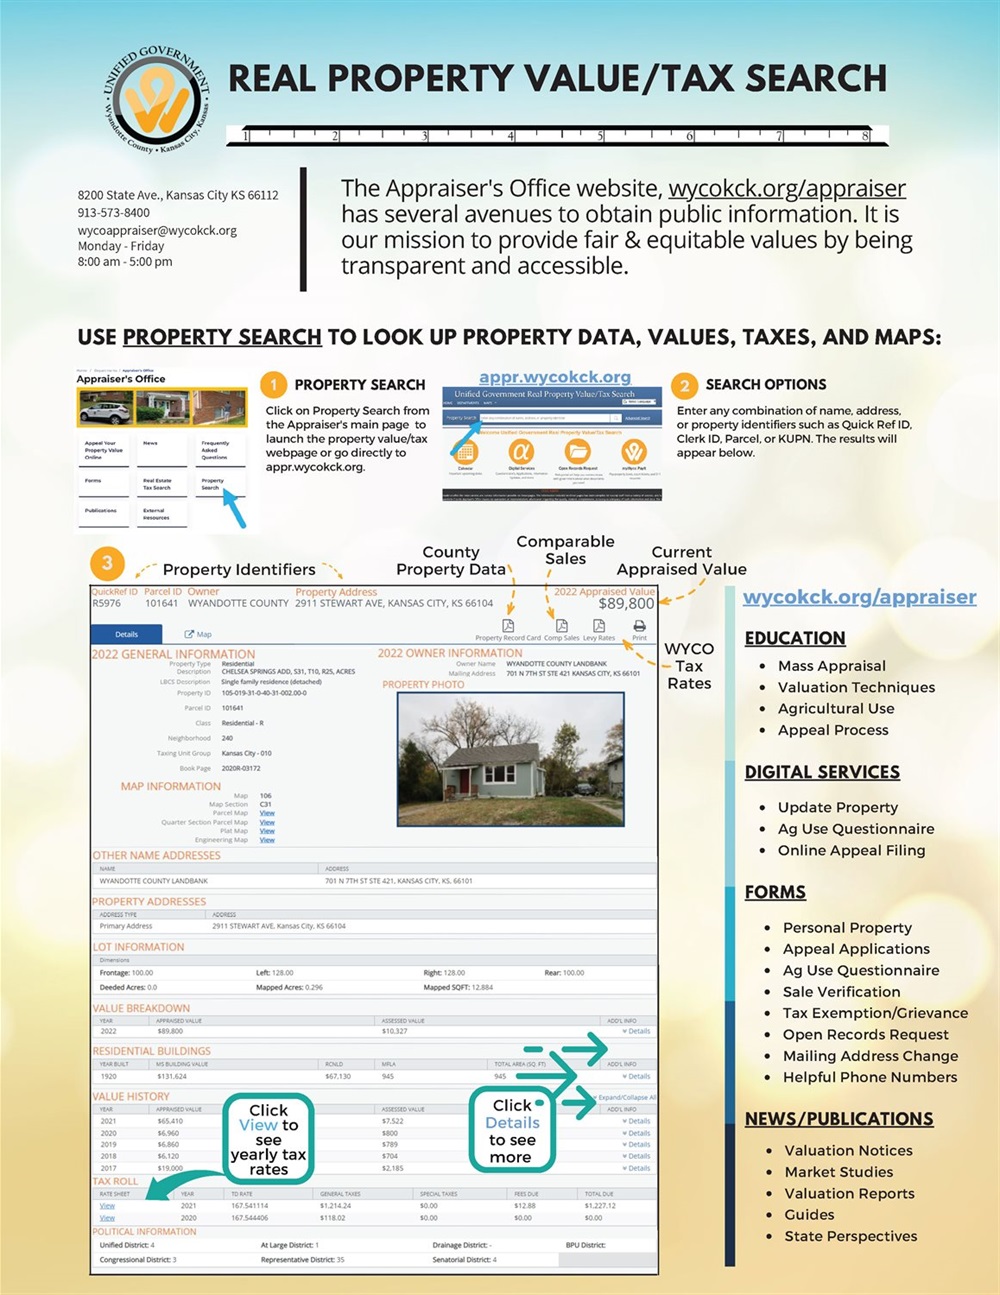 Go to appr.wycokck.org to look-up property data, values, taxes and maps.